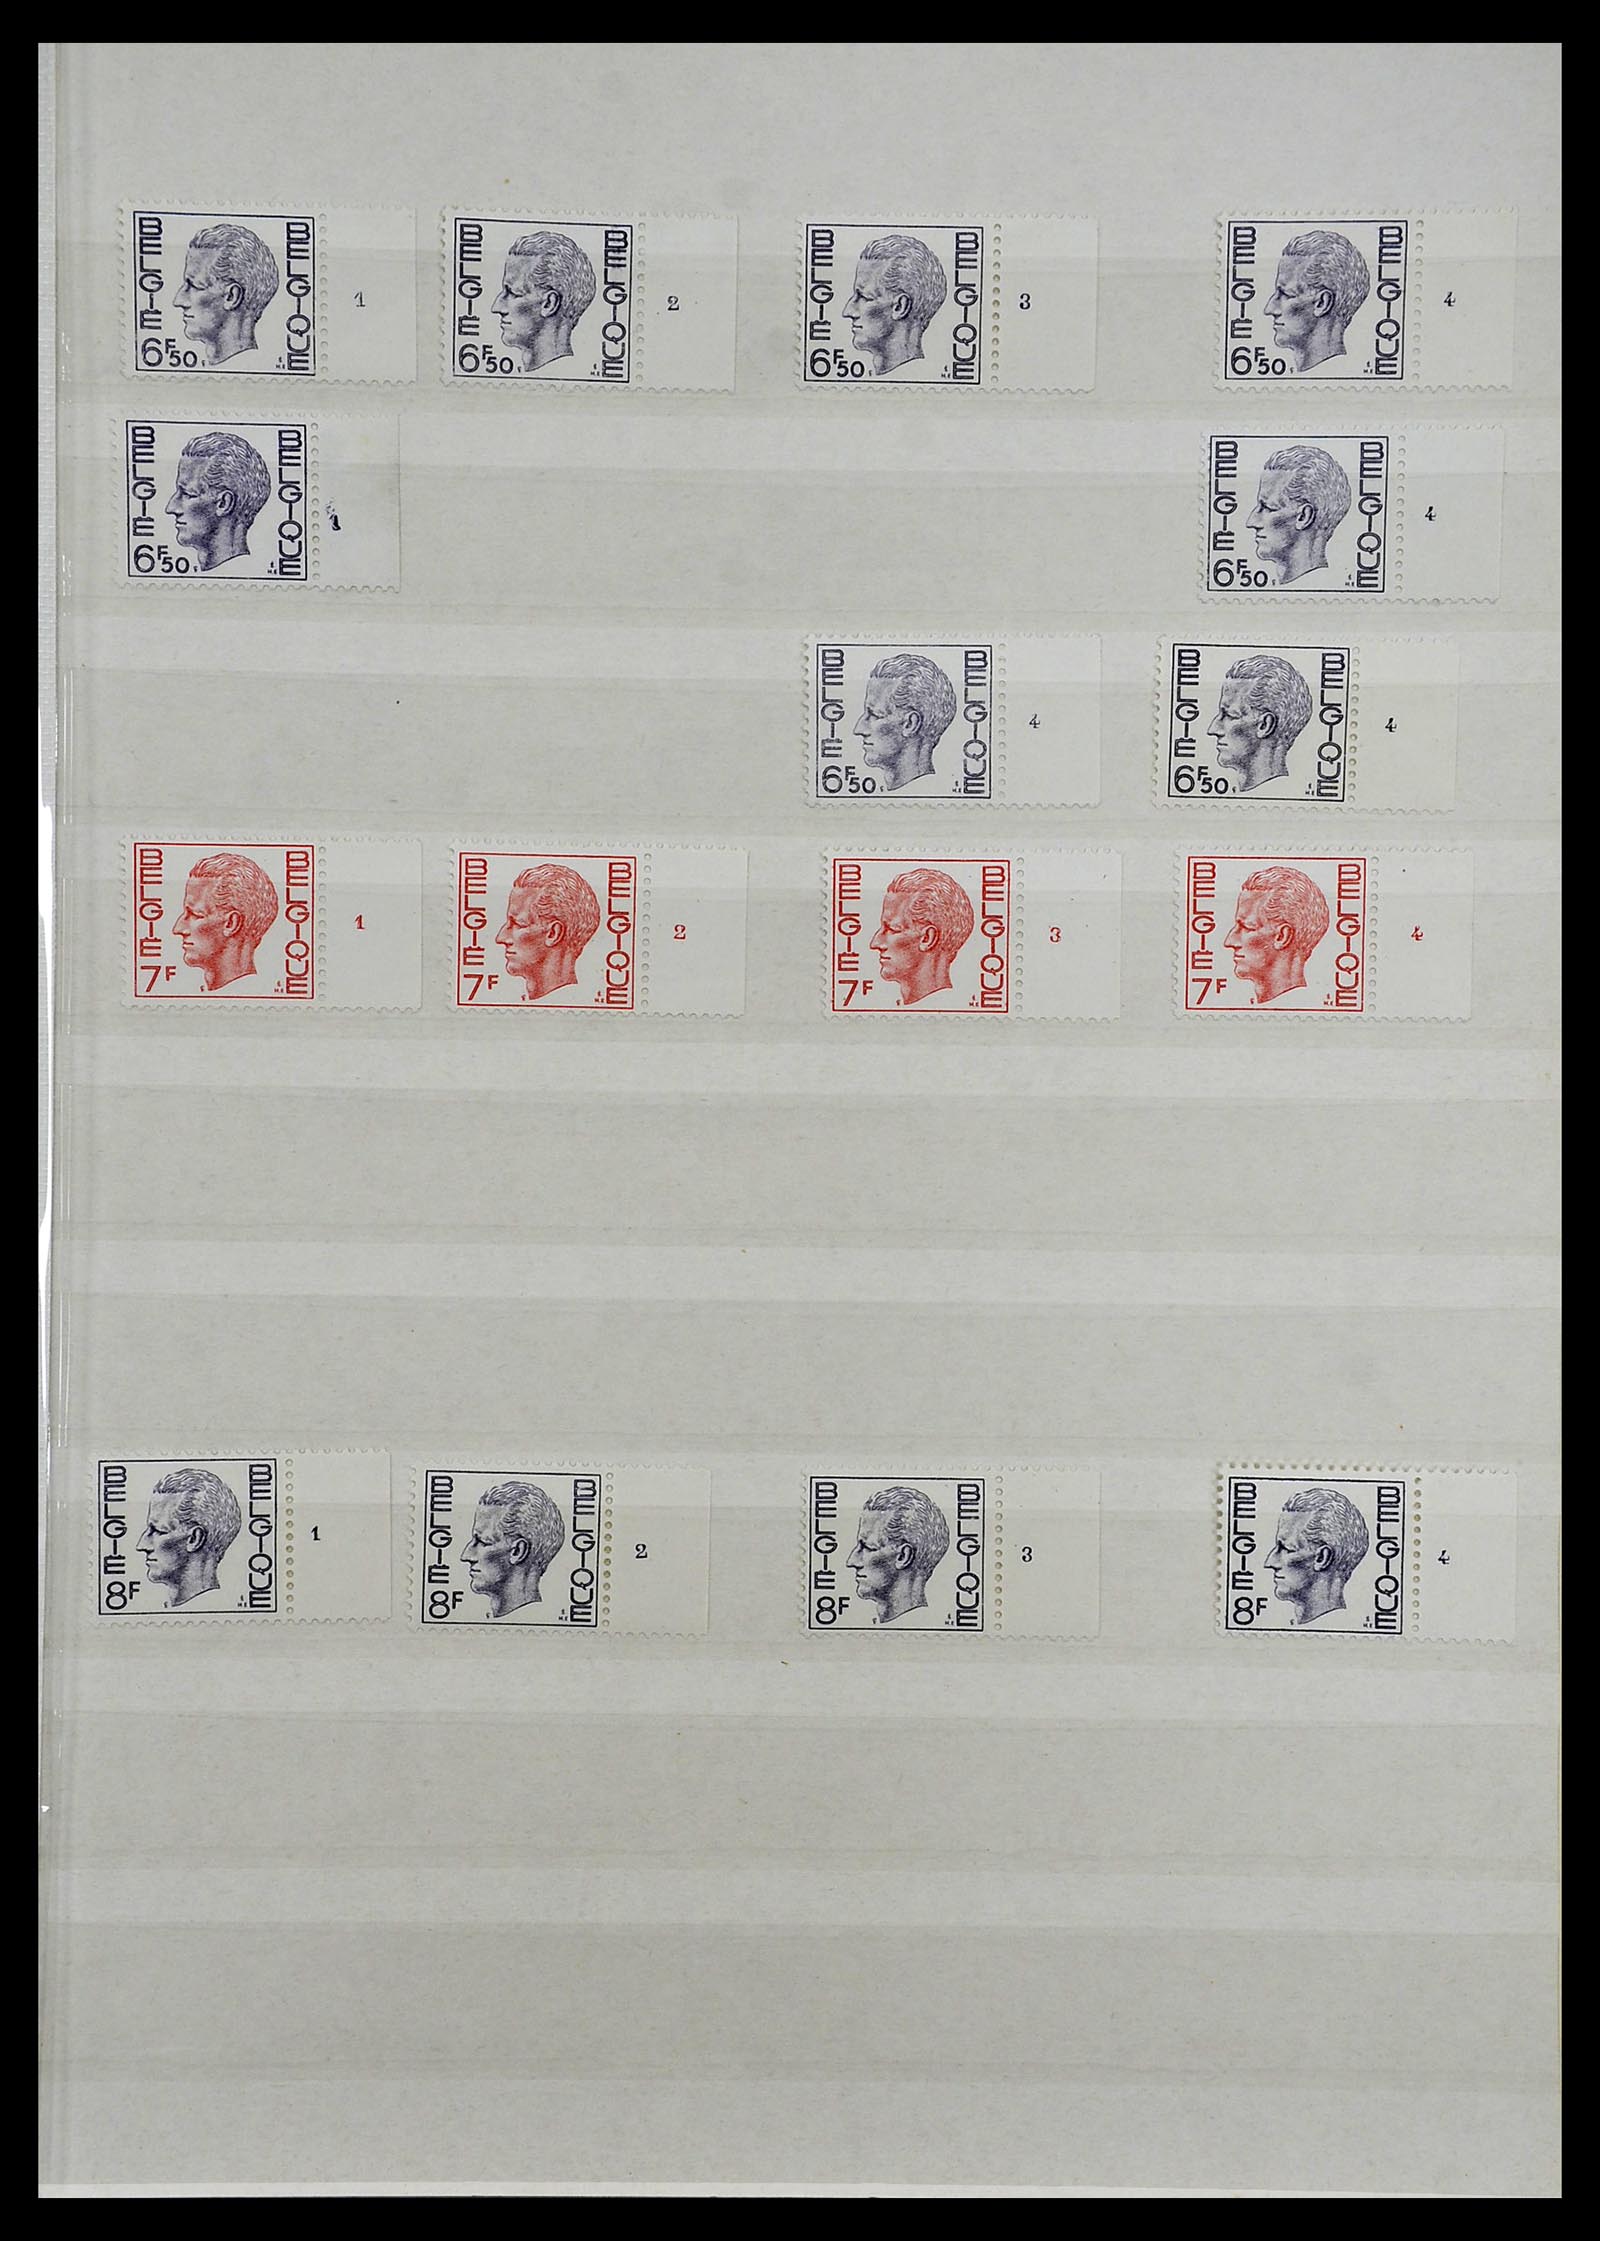 34524 095 - Stamp Collection 34524 Belgium plate and etching numbers 1963-1990.